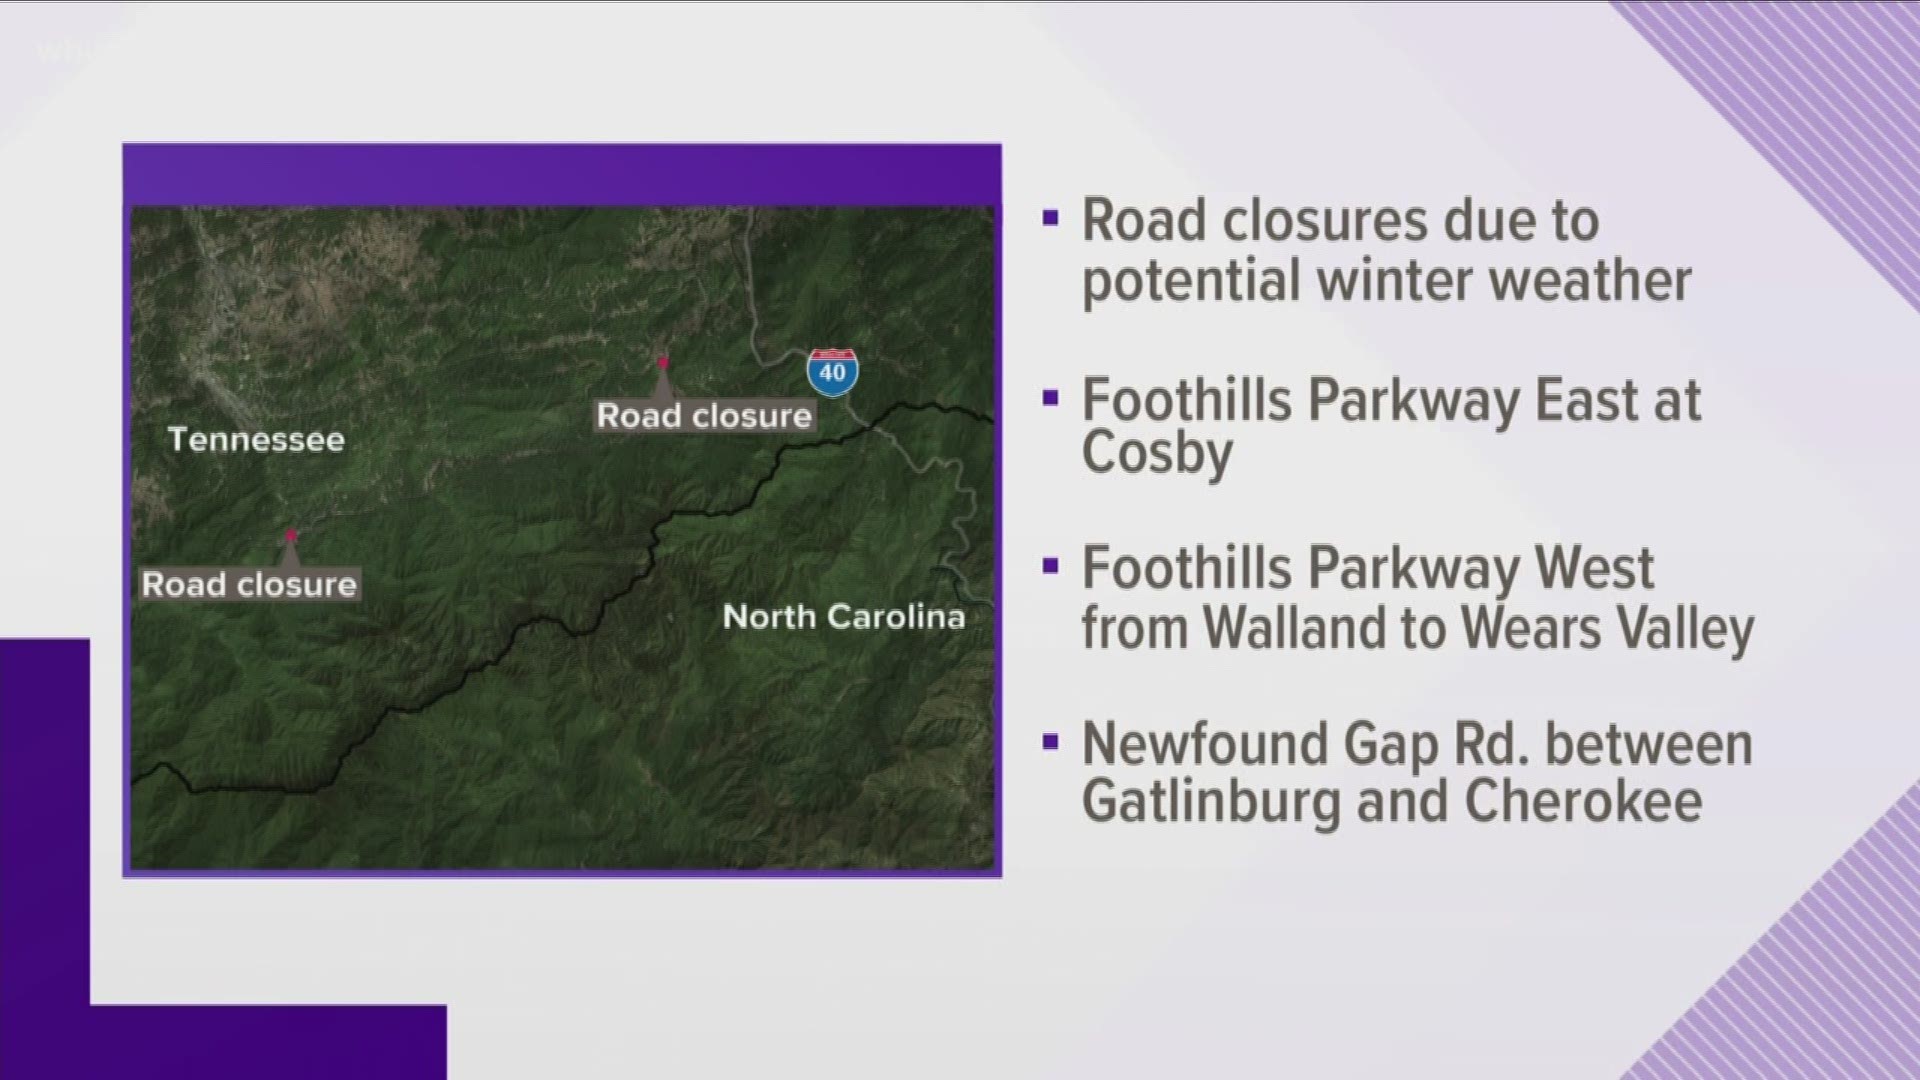 Great Smoky Mountain Park officials said Foothills Parkway East at Cosby and Foothills Parkway West from Walland to Wears Valley closed at 4 p.m. Sunday.